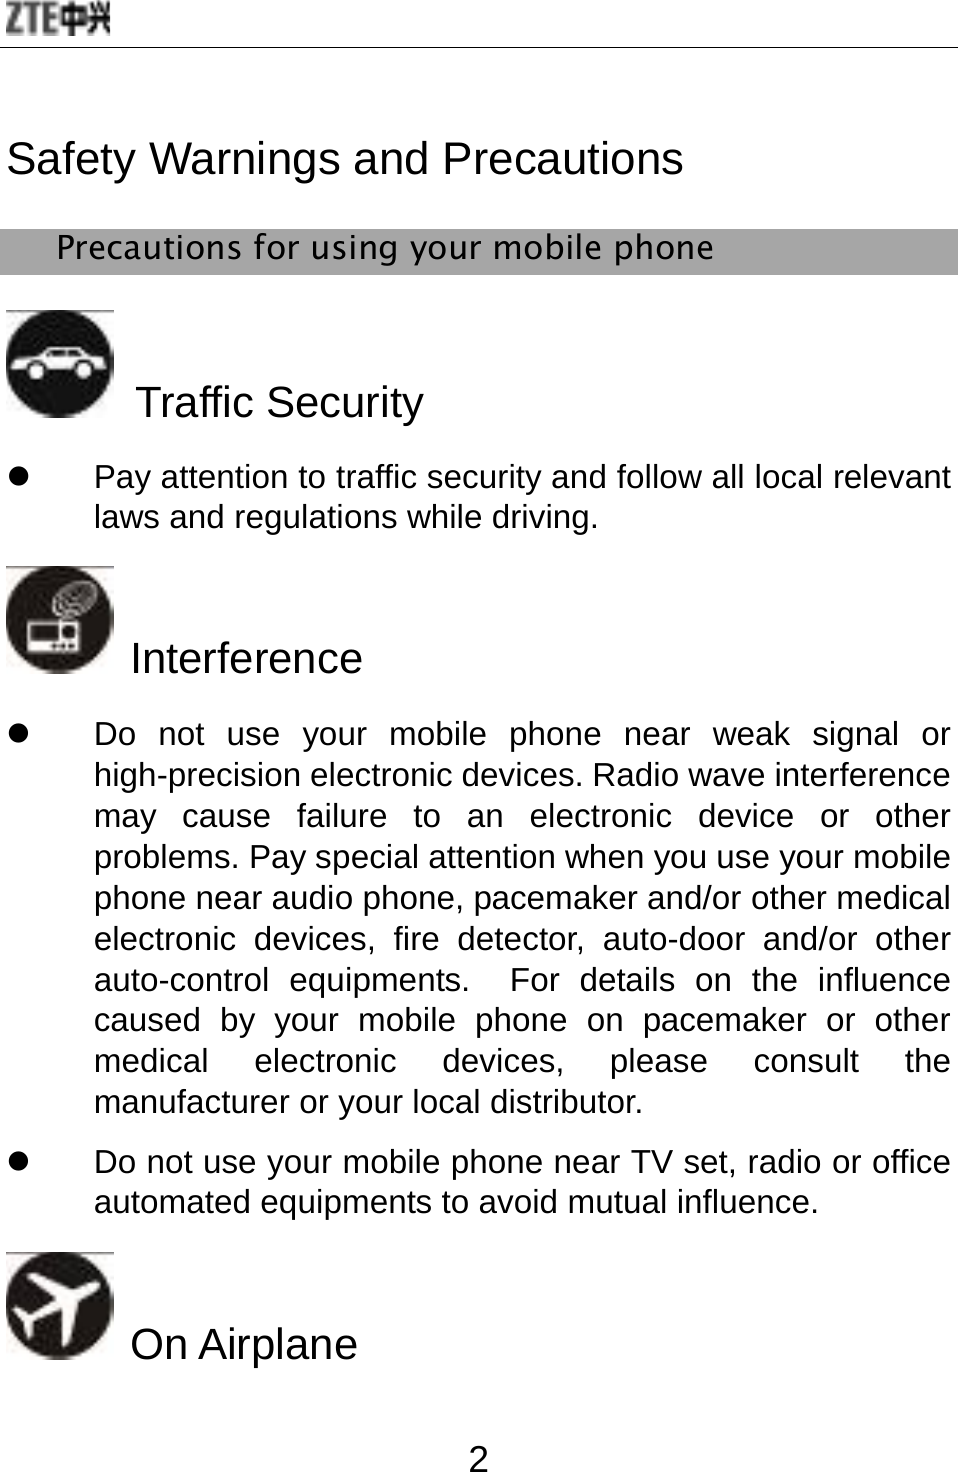  2 Safety Warnings and Precautions Precautions for using your mobile phone  Traffic Security z  Pay attention to traffic security and follow all local relevant laws and regulations while driving.  Interference   z  Do not use your mobile phone near weak signal or high-precision electronic devices. Radio wave interference may cause failure to an electronic device or other problems. Pay special attention when you use your mobile phone near audio phone, pacemaker and/or other medical electronic devices, fire detector, auto-door and/or other auto-control equipments.  For details on the influence caused by your mobile phone on pacemaker or other medical electronic devices, please consult the manufacturer or your local distributor. z  Do not use your mobile phone near TV set, radio or office automated equipments to avoid mutual influence.  On Airplane 